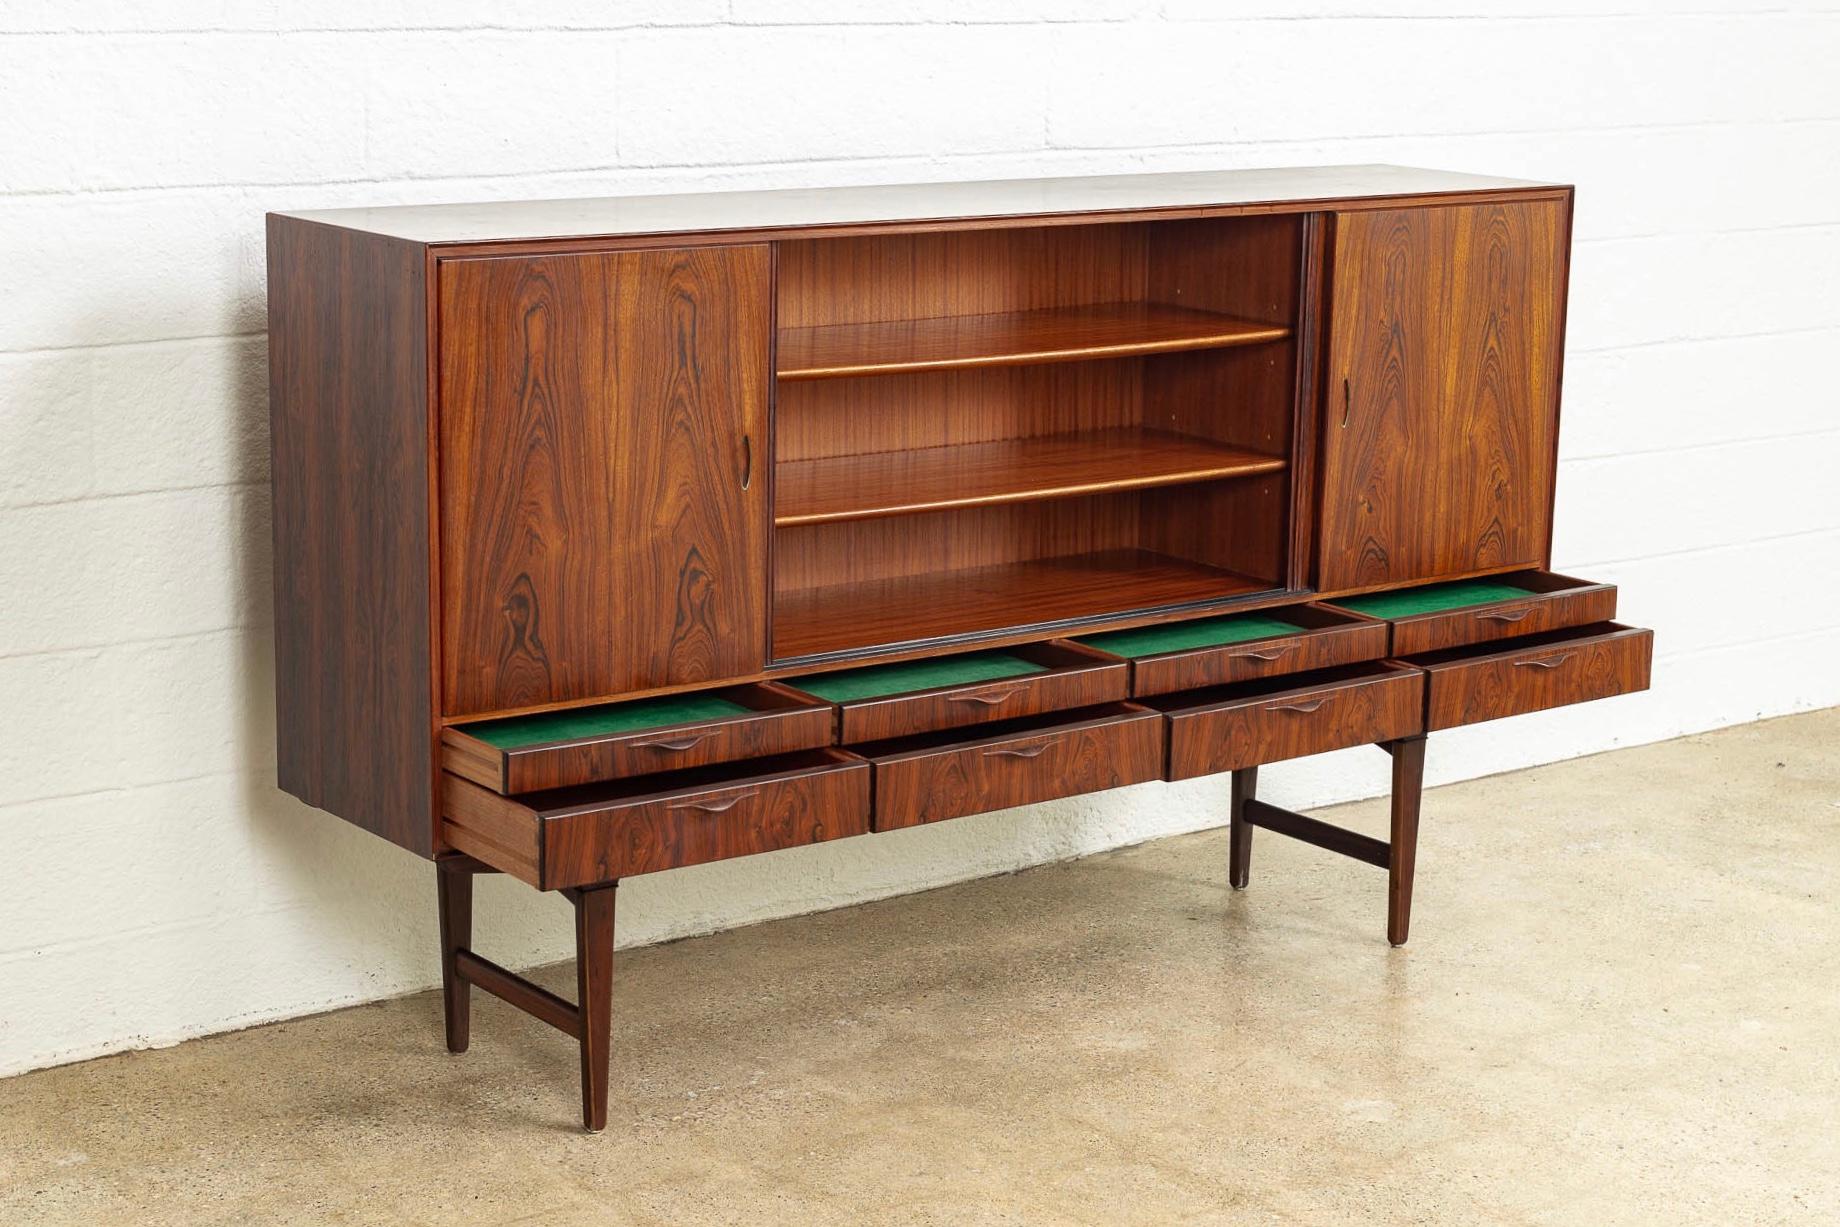 Wood Midcentury Danish Modern Tall Rosewood Credenza Sideboard Buffet Cabinet, 1960s